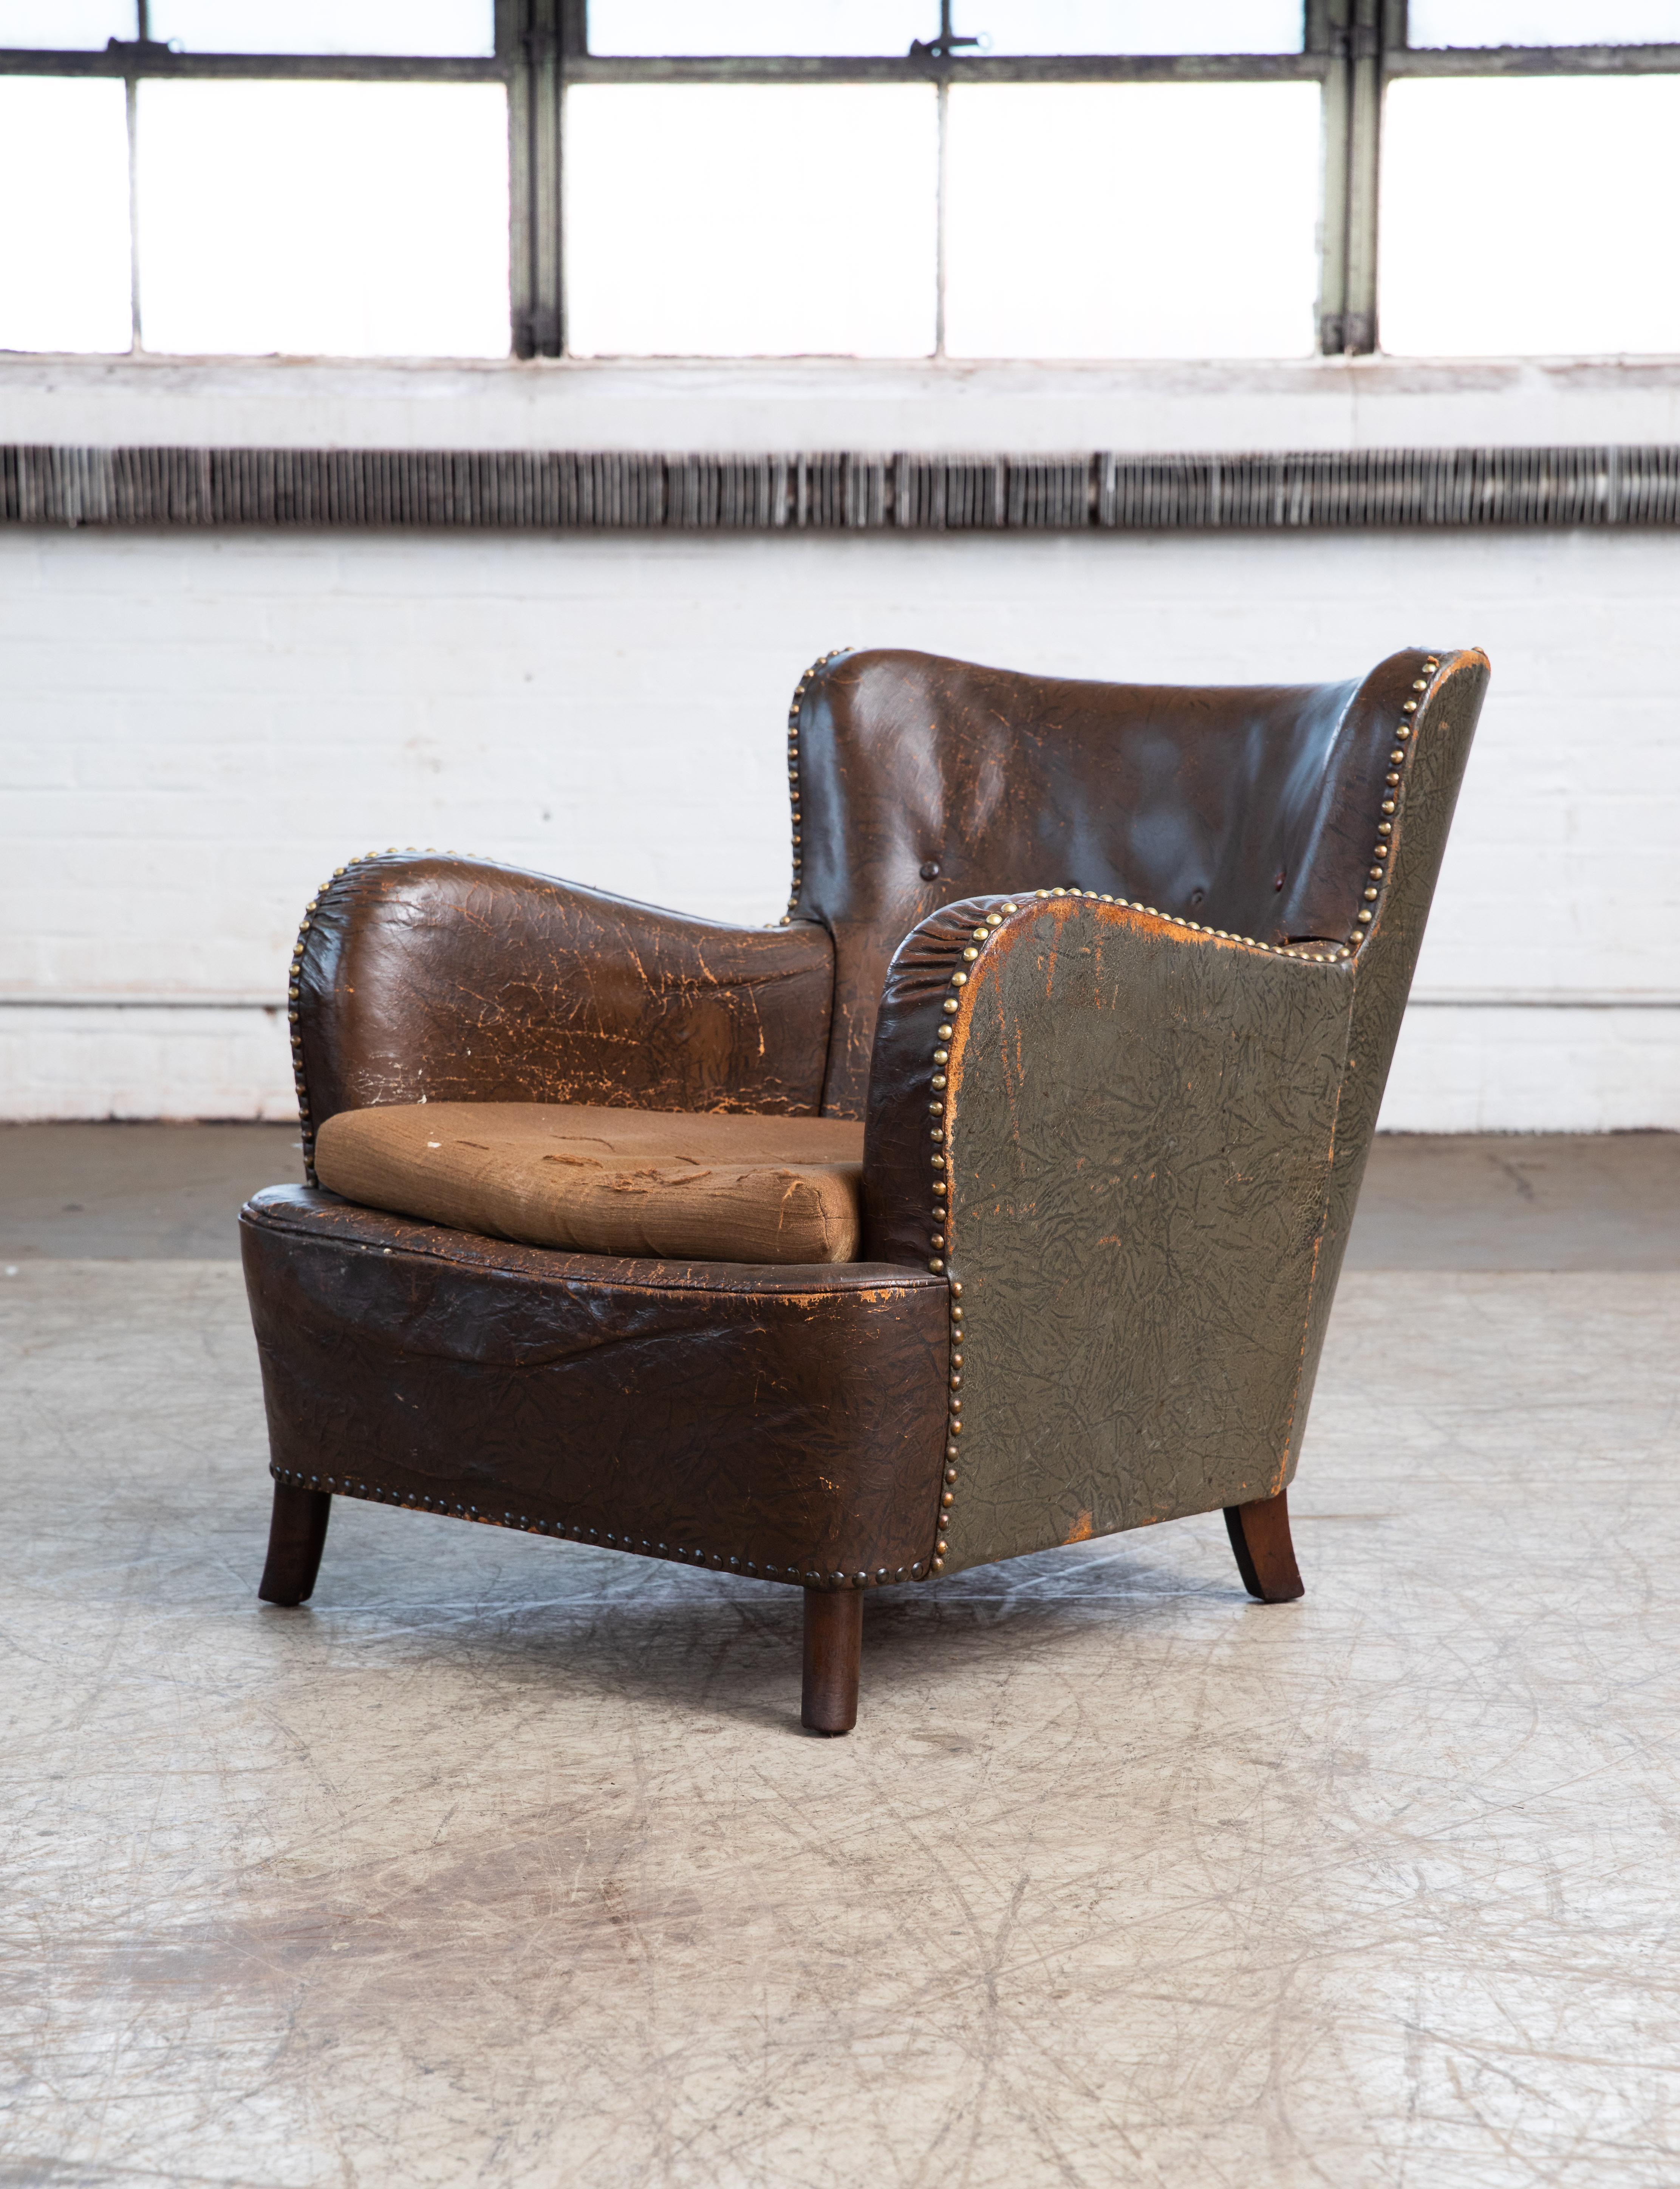 Charming Danish leather club chair from around 1940. Covered in original chocolate brown leather with a smooth back and 4 buttons. Overall good condition for its age and use with lots of noble patina and wear providing for a very authentic look.